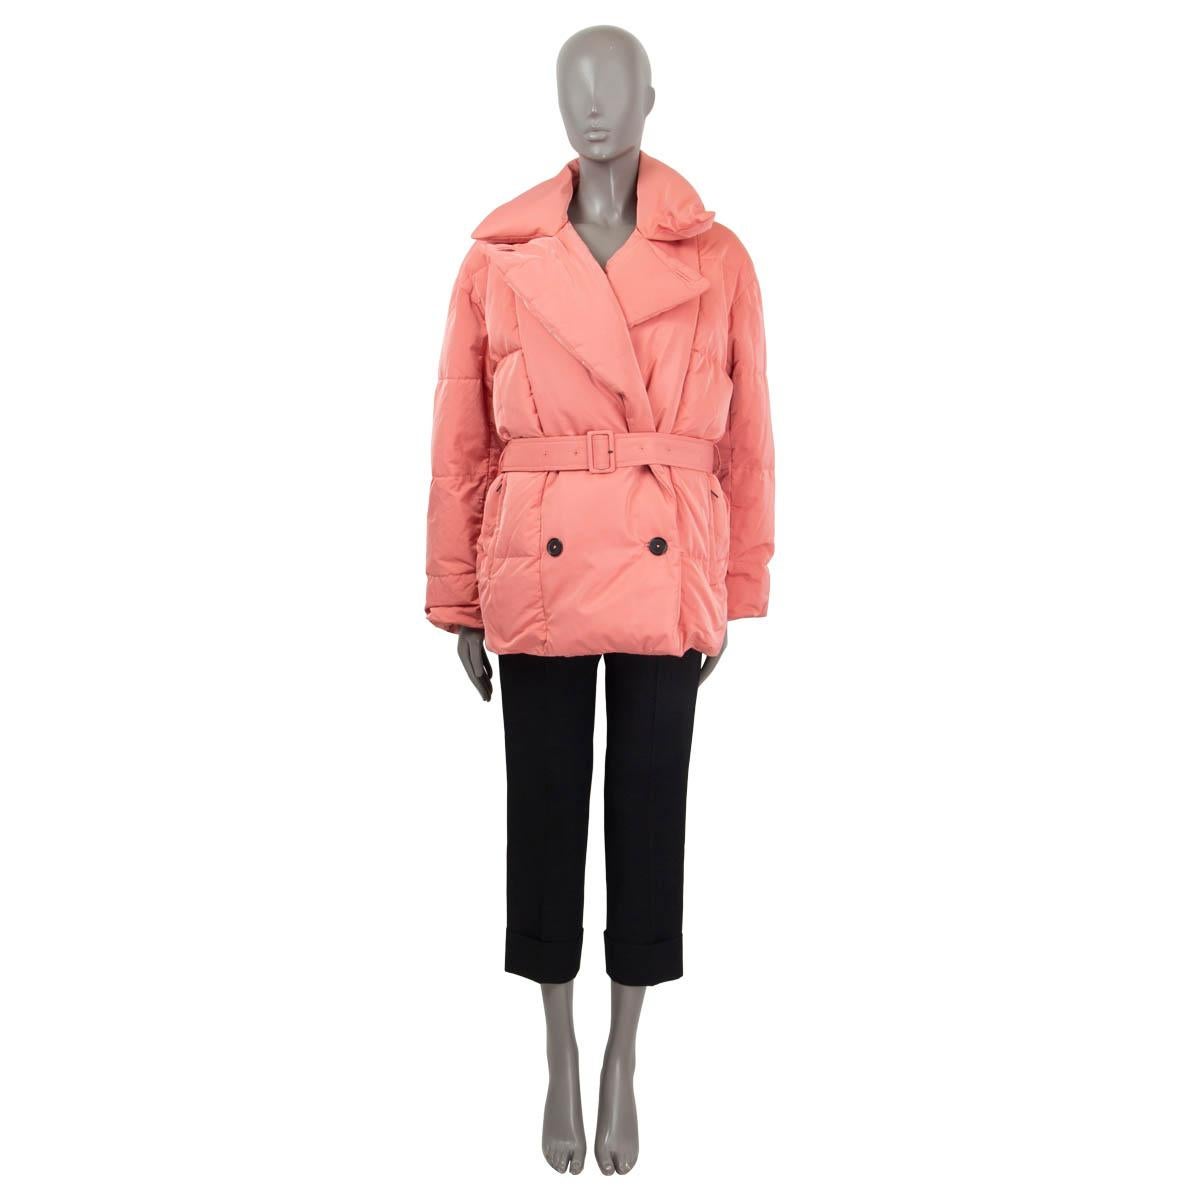 100% authentic Jil Sander oversized double breasted down jacket in pink polyester (70%) and silk (30%). Features a detachable matching belt and two zip slit pockets. Opens with buttons on the front. Lined in black polyester (100%). Has been worn and